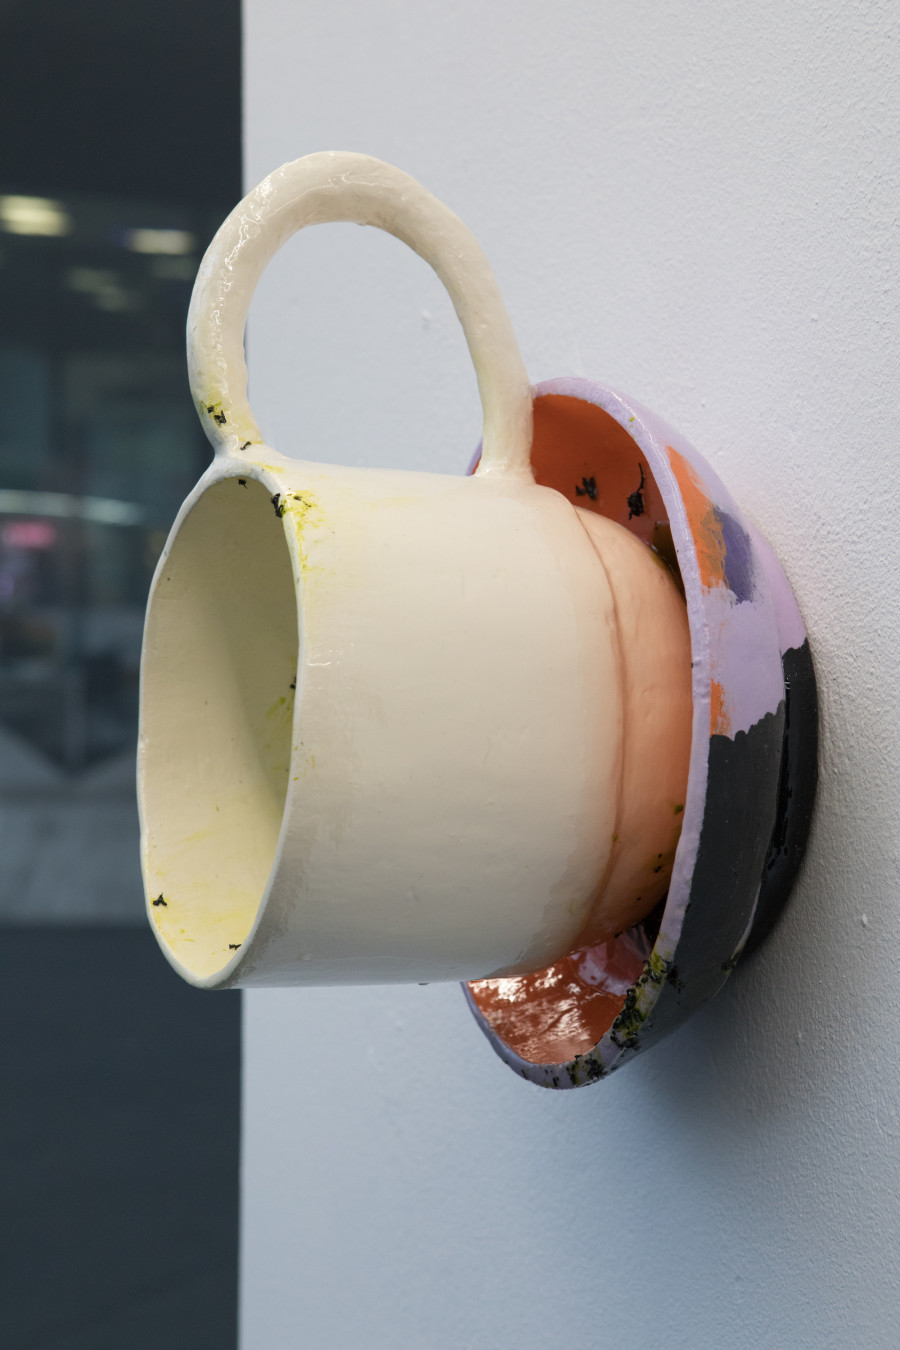 Ilaria Vinci, And nothing but the truth, 2021. Plaster, enamel, resin, tea leaves. 40 x 30 x 23 cm. Courtesy of artist and VITRINE London/Basel.